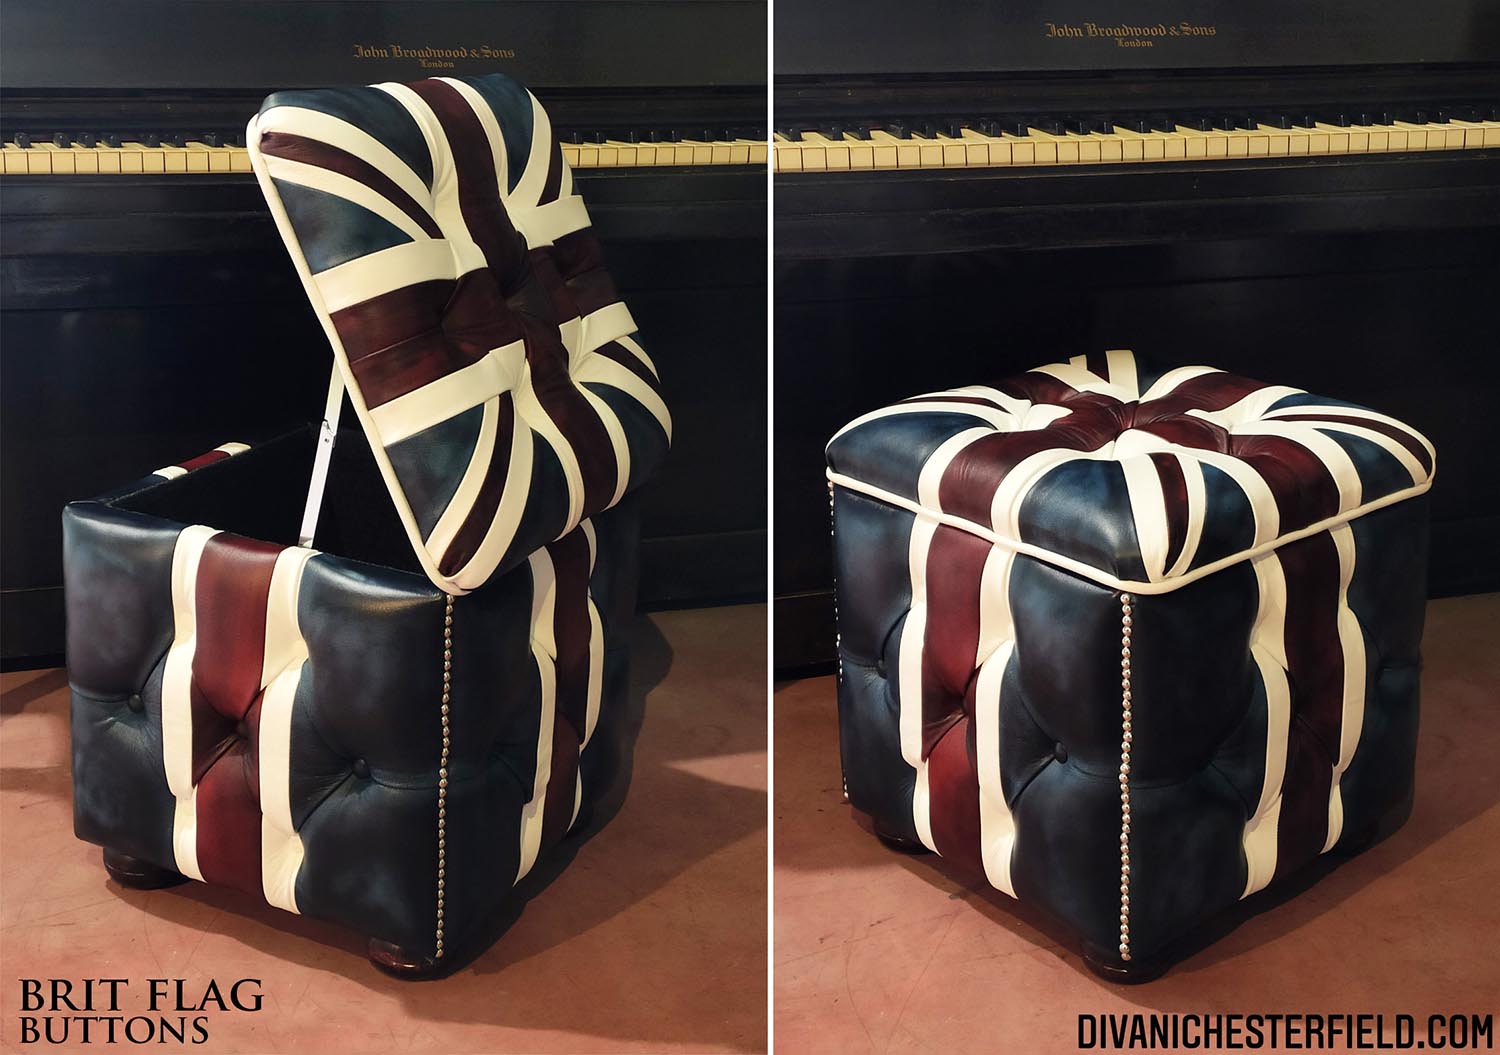 multi coloured flag footstool open box lid british flag buttoned chesterfield vintage patchwork leathers